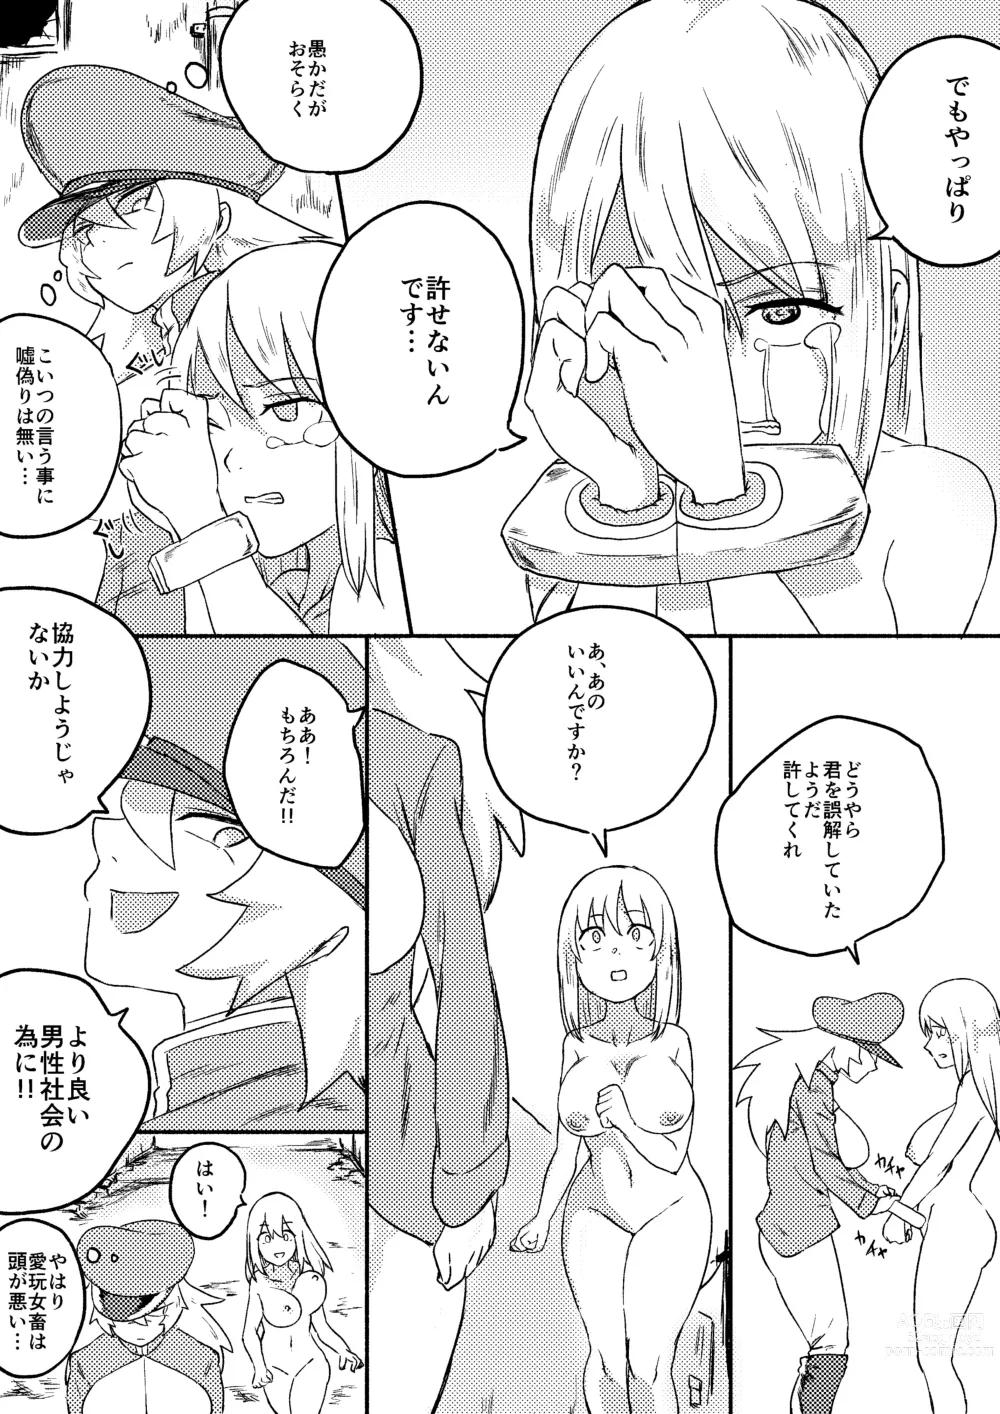 Page 11 of doujinshi Red Tag Episode 7 Part 1